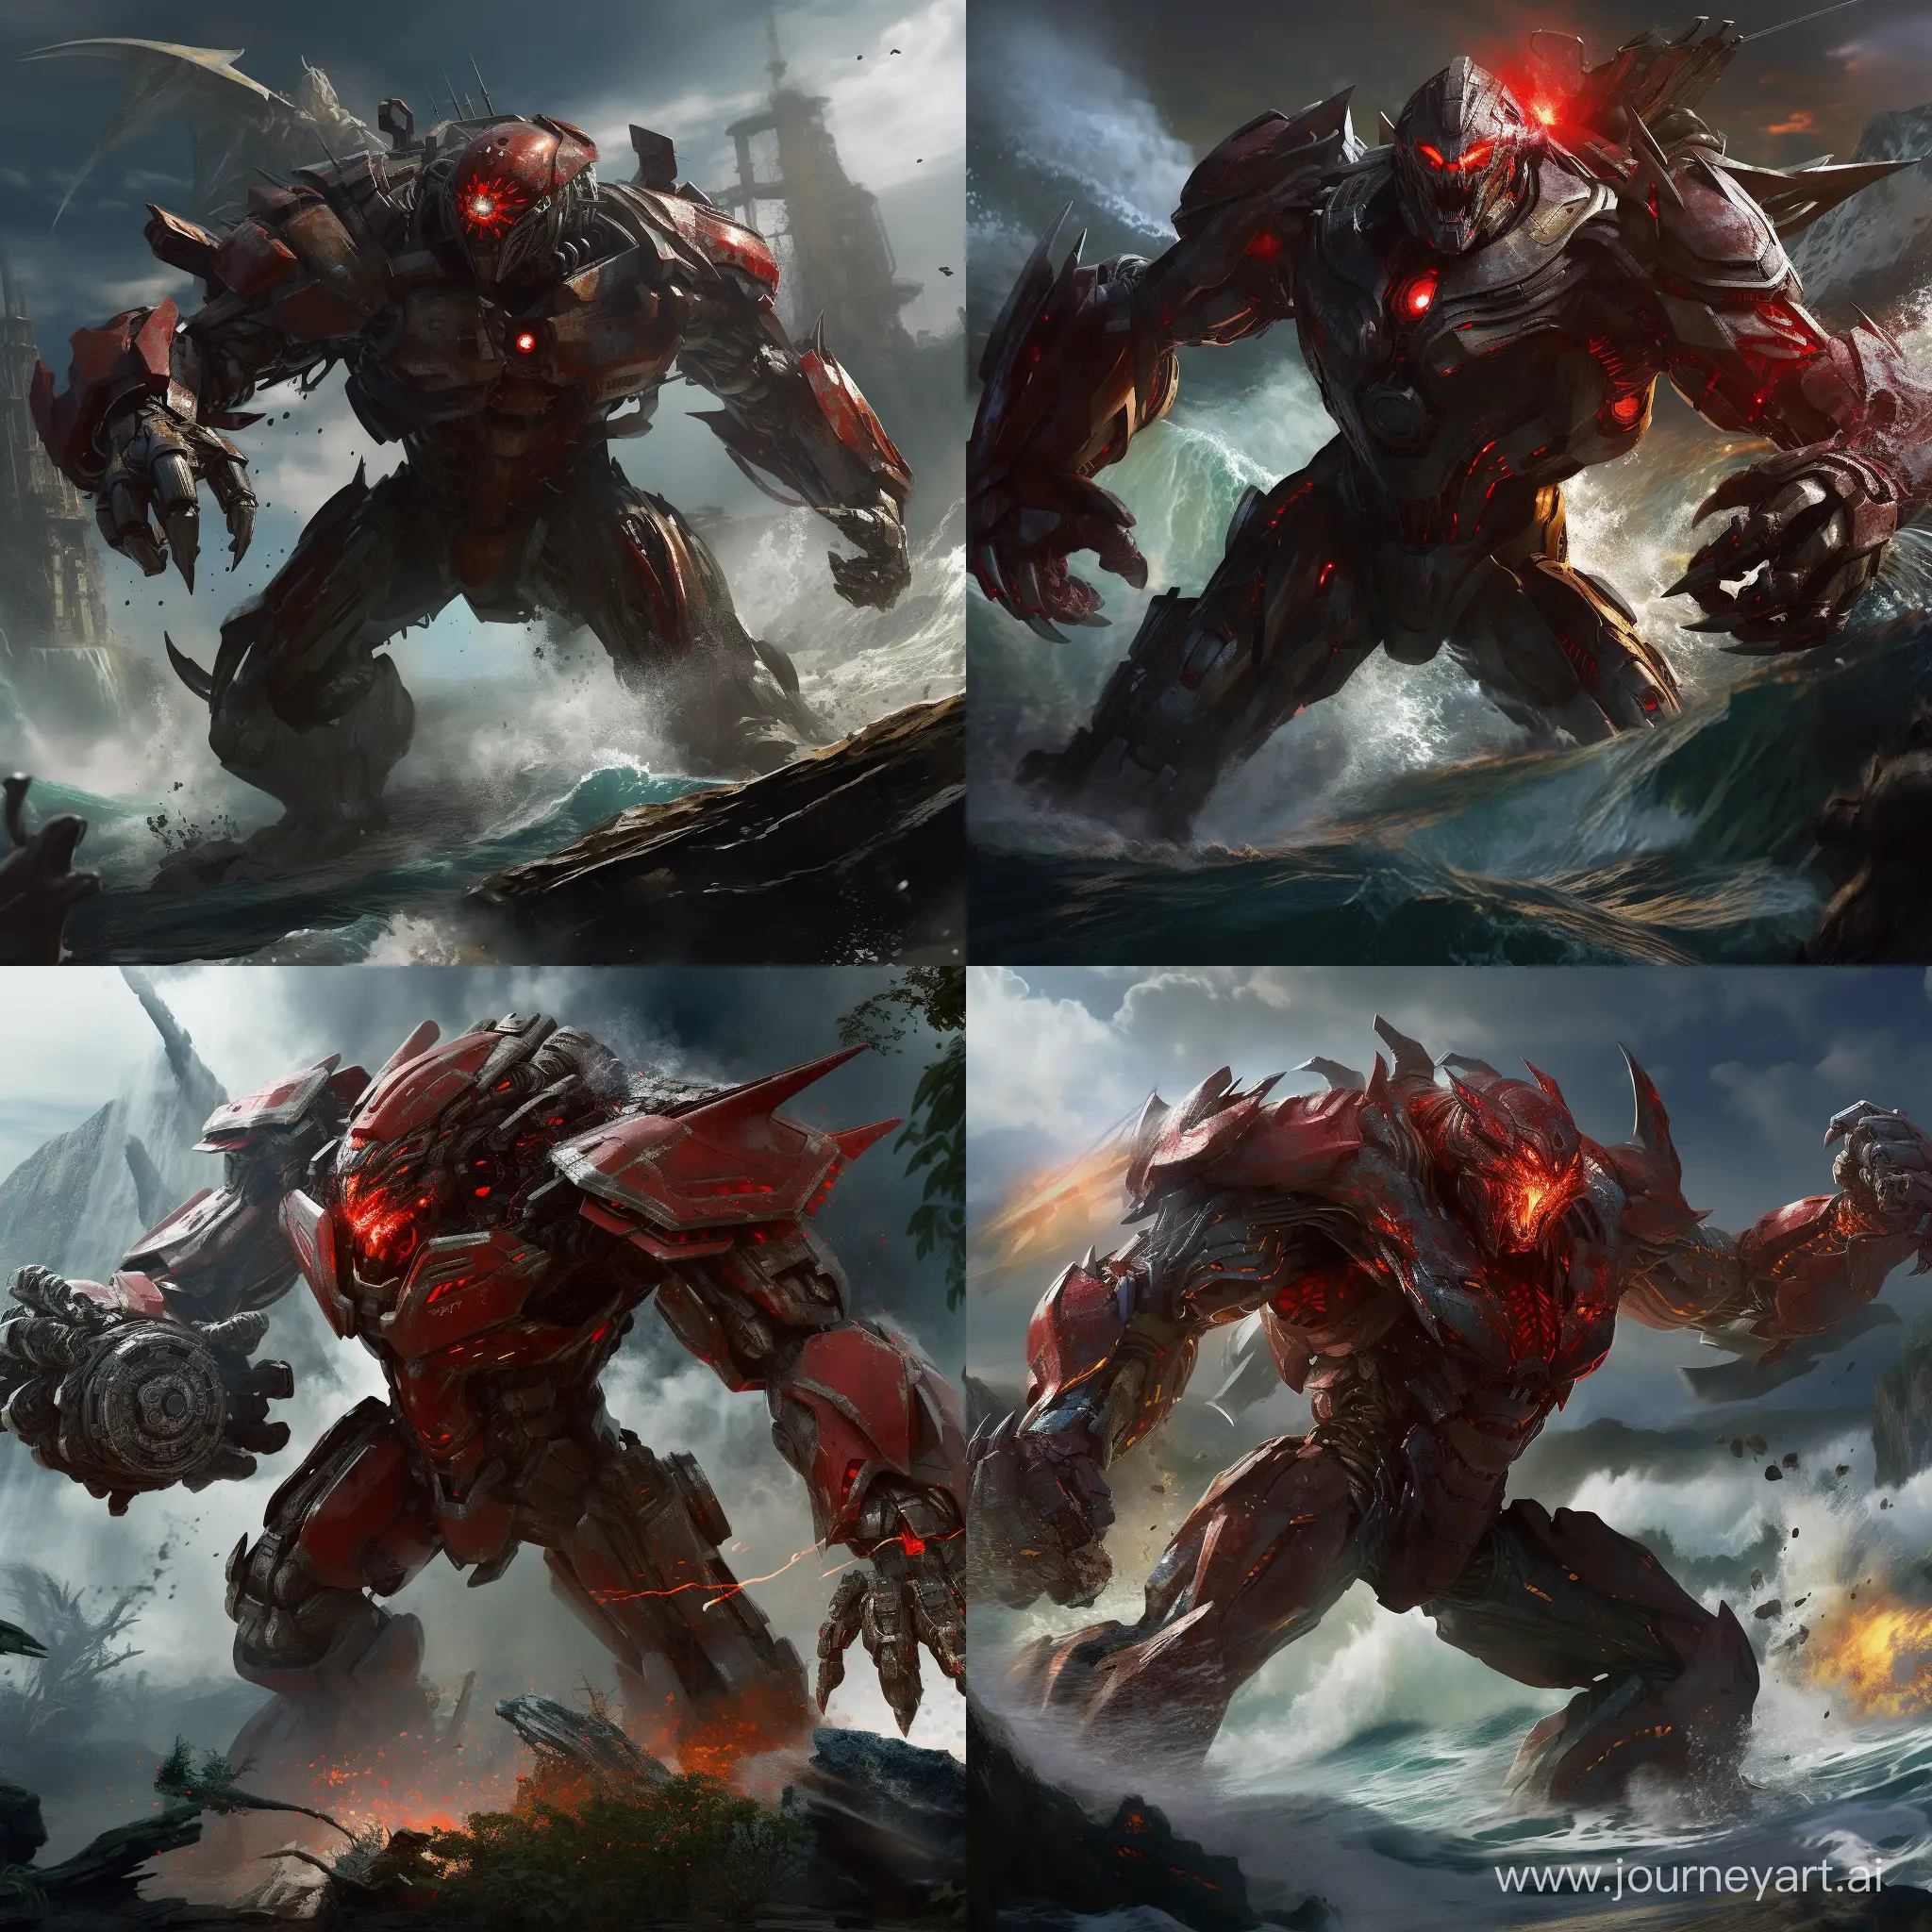 the Crimson Typhoon robot in pacific rim fighting against KingKong